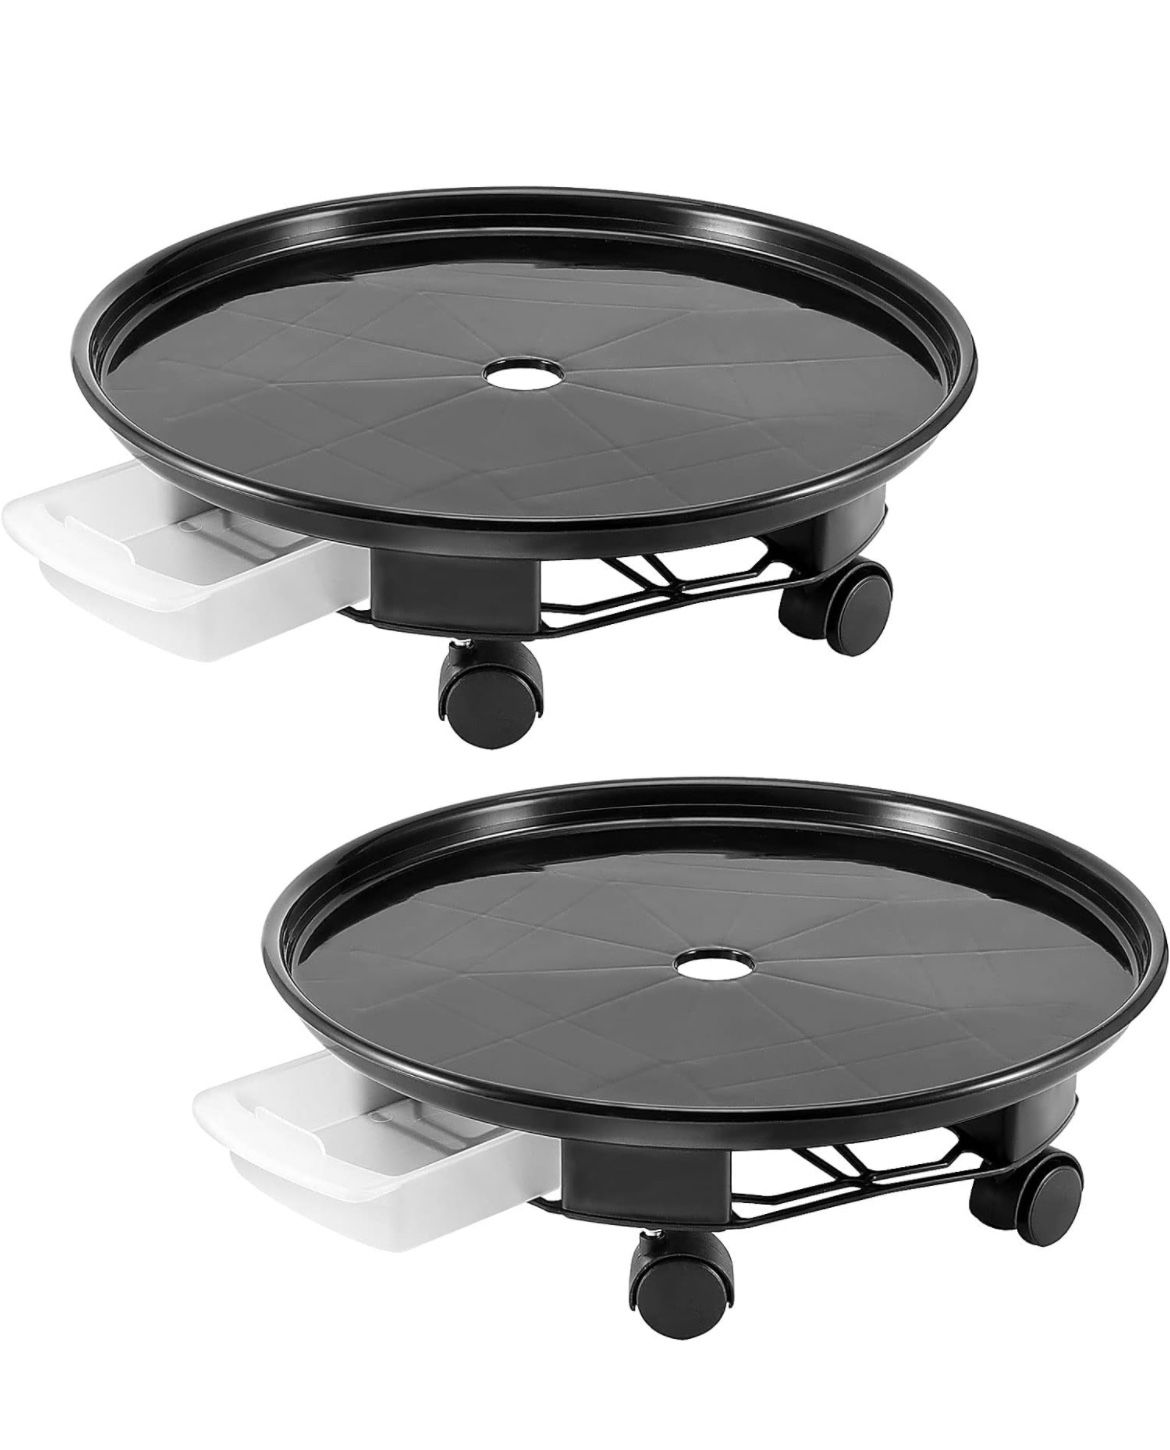 2 PCS 15 Inch Black Plant Caddy, Round Flower Pot Mover Plant Saucer with Caster Wheels and Water Container, Movable Planter Dolly Trolley Tray for Ou